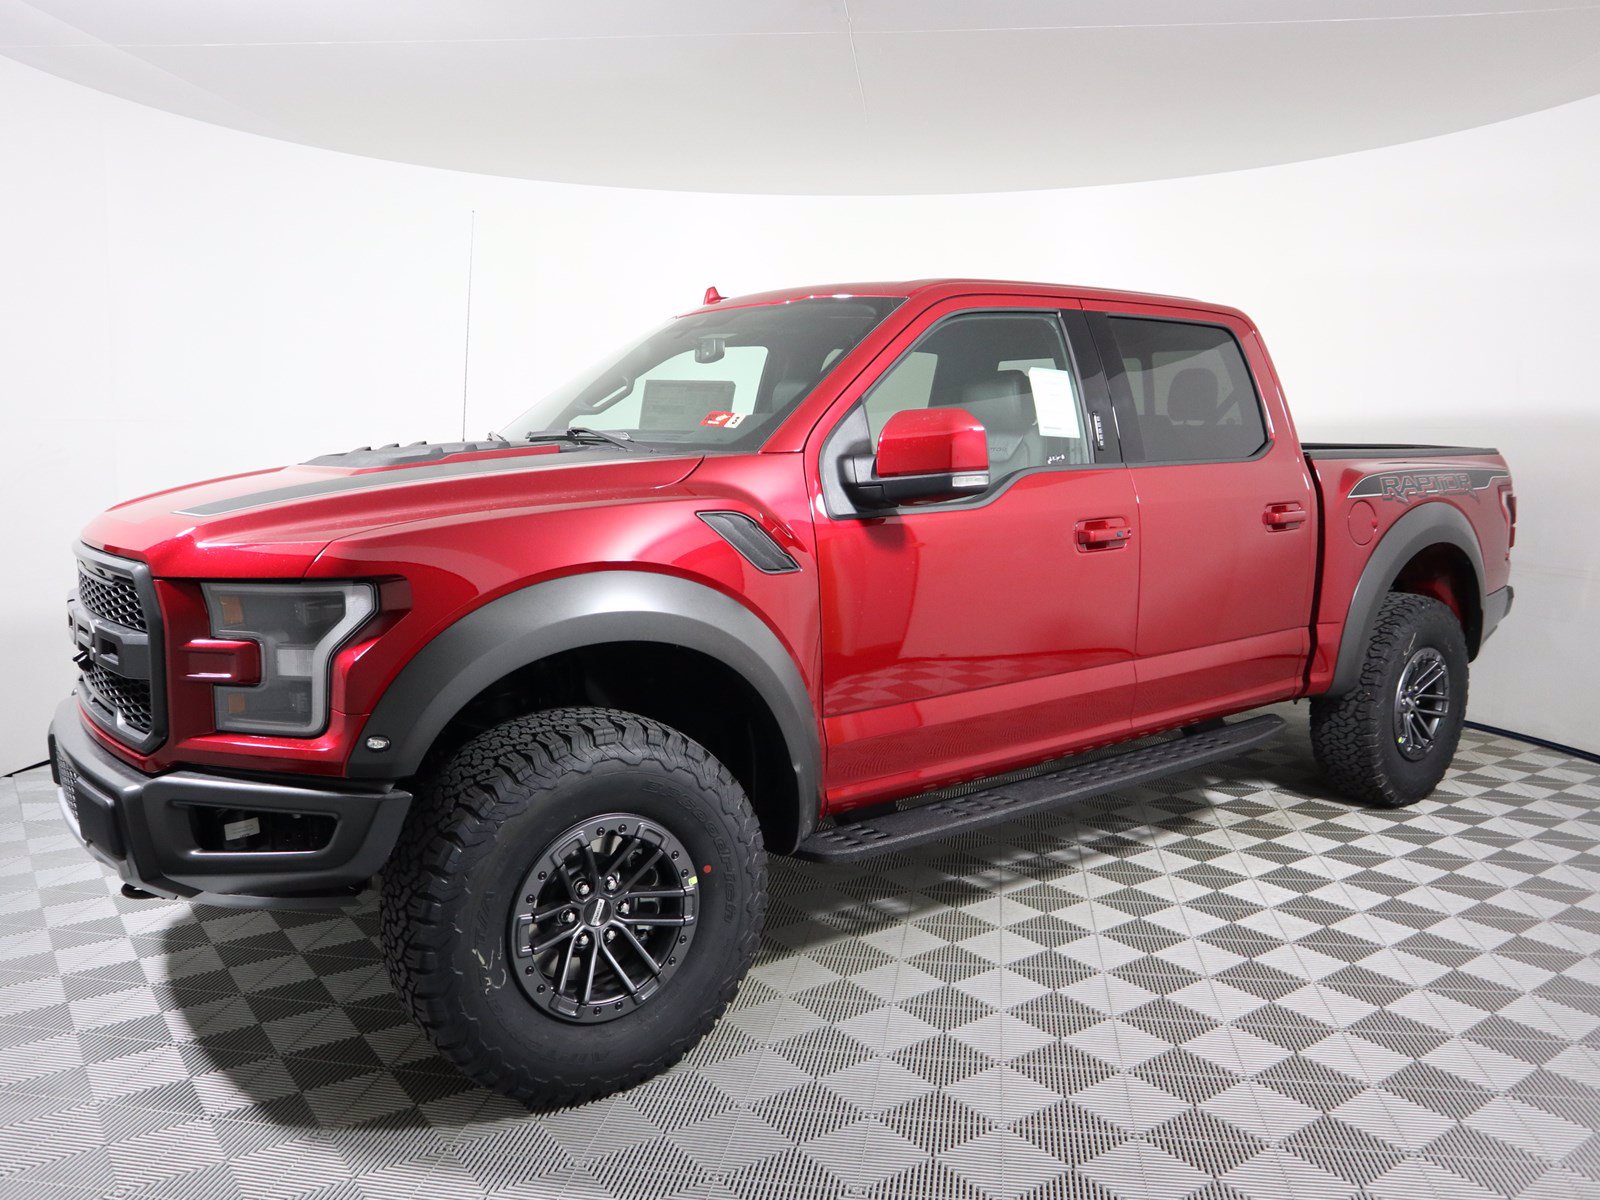 New 2020 Ford F-150 Raptor Crew Cab Pickup in Parkersburg #F19901 ...